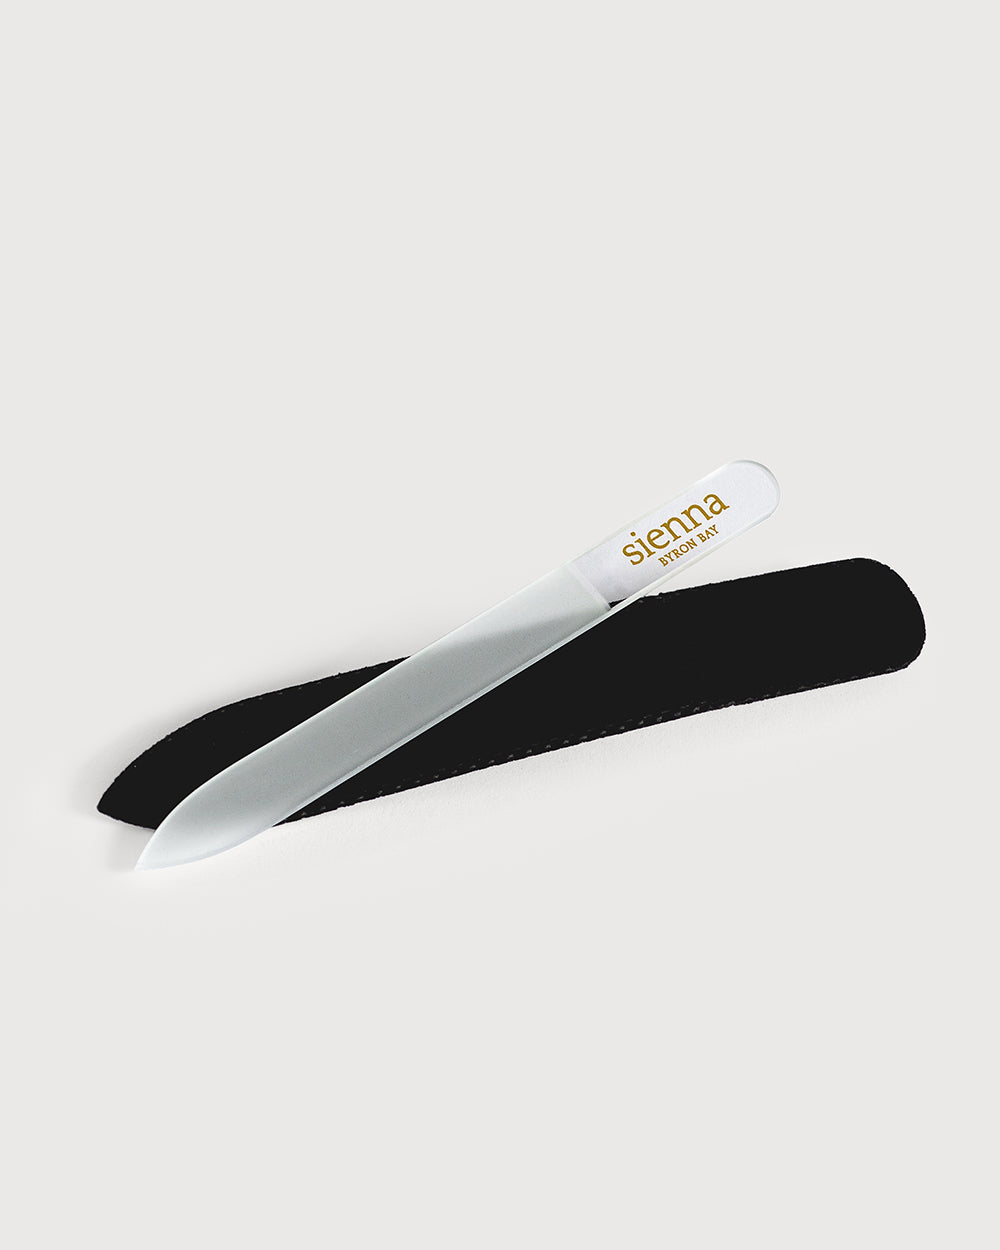 glass nail file on top of black sleeve by sienna